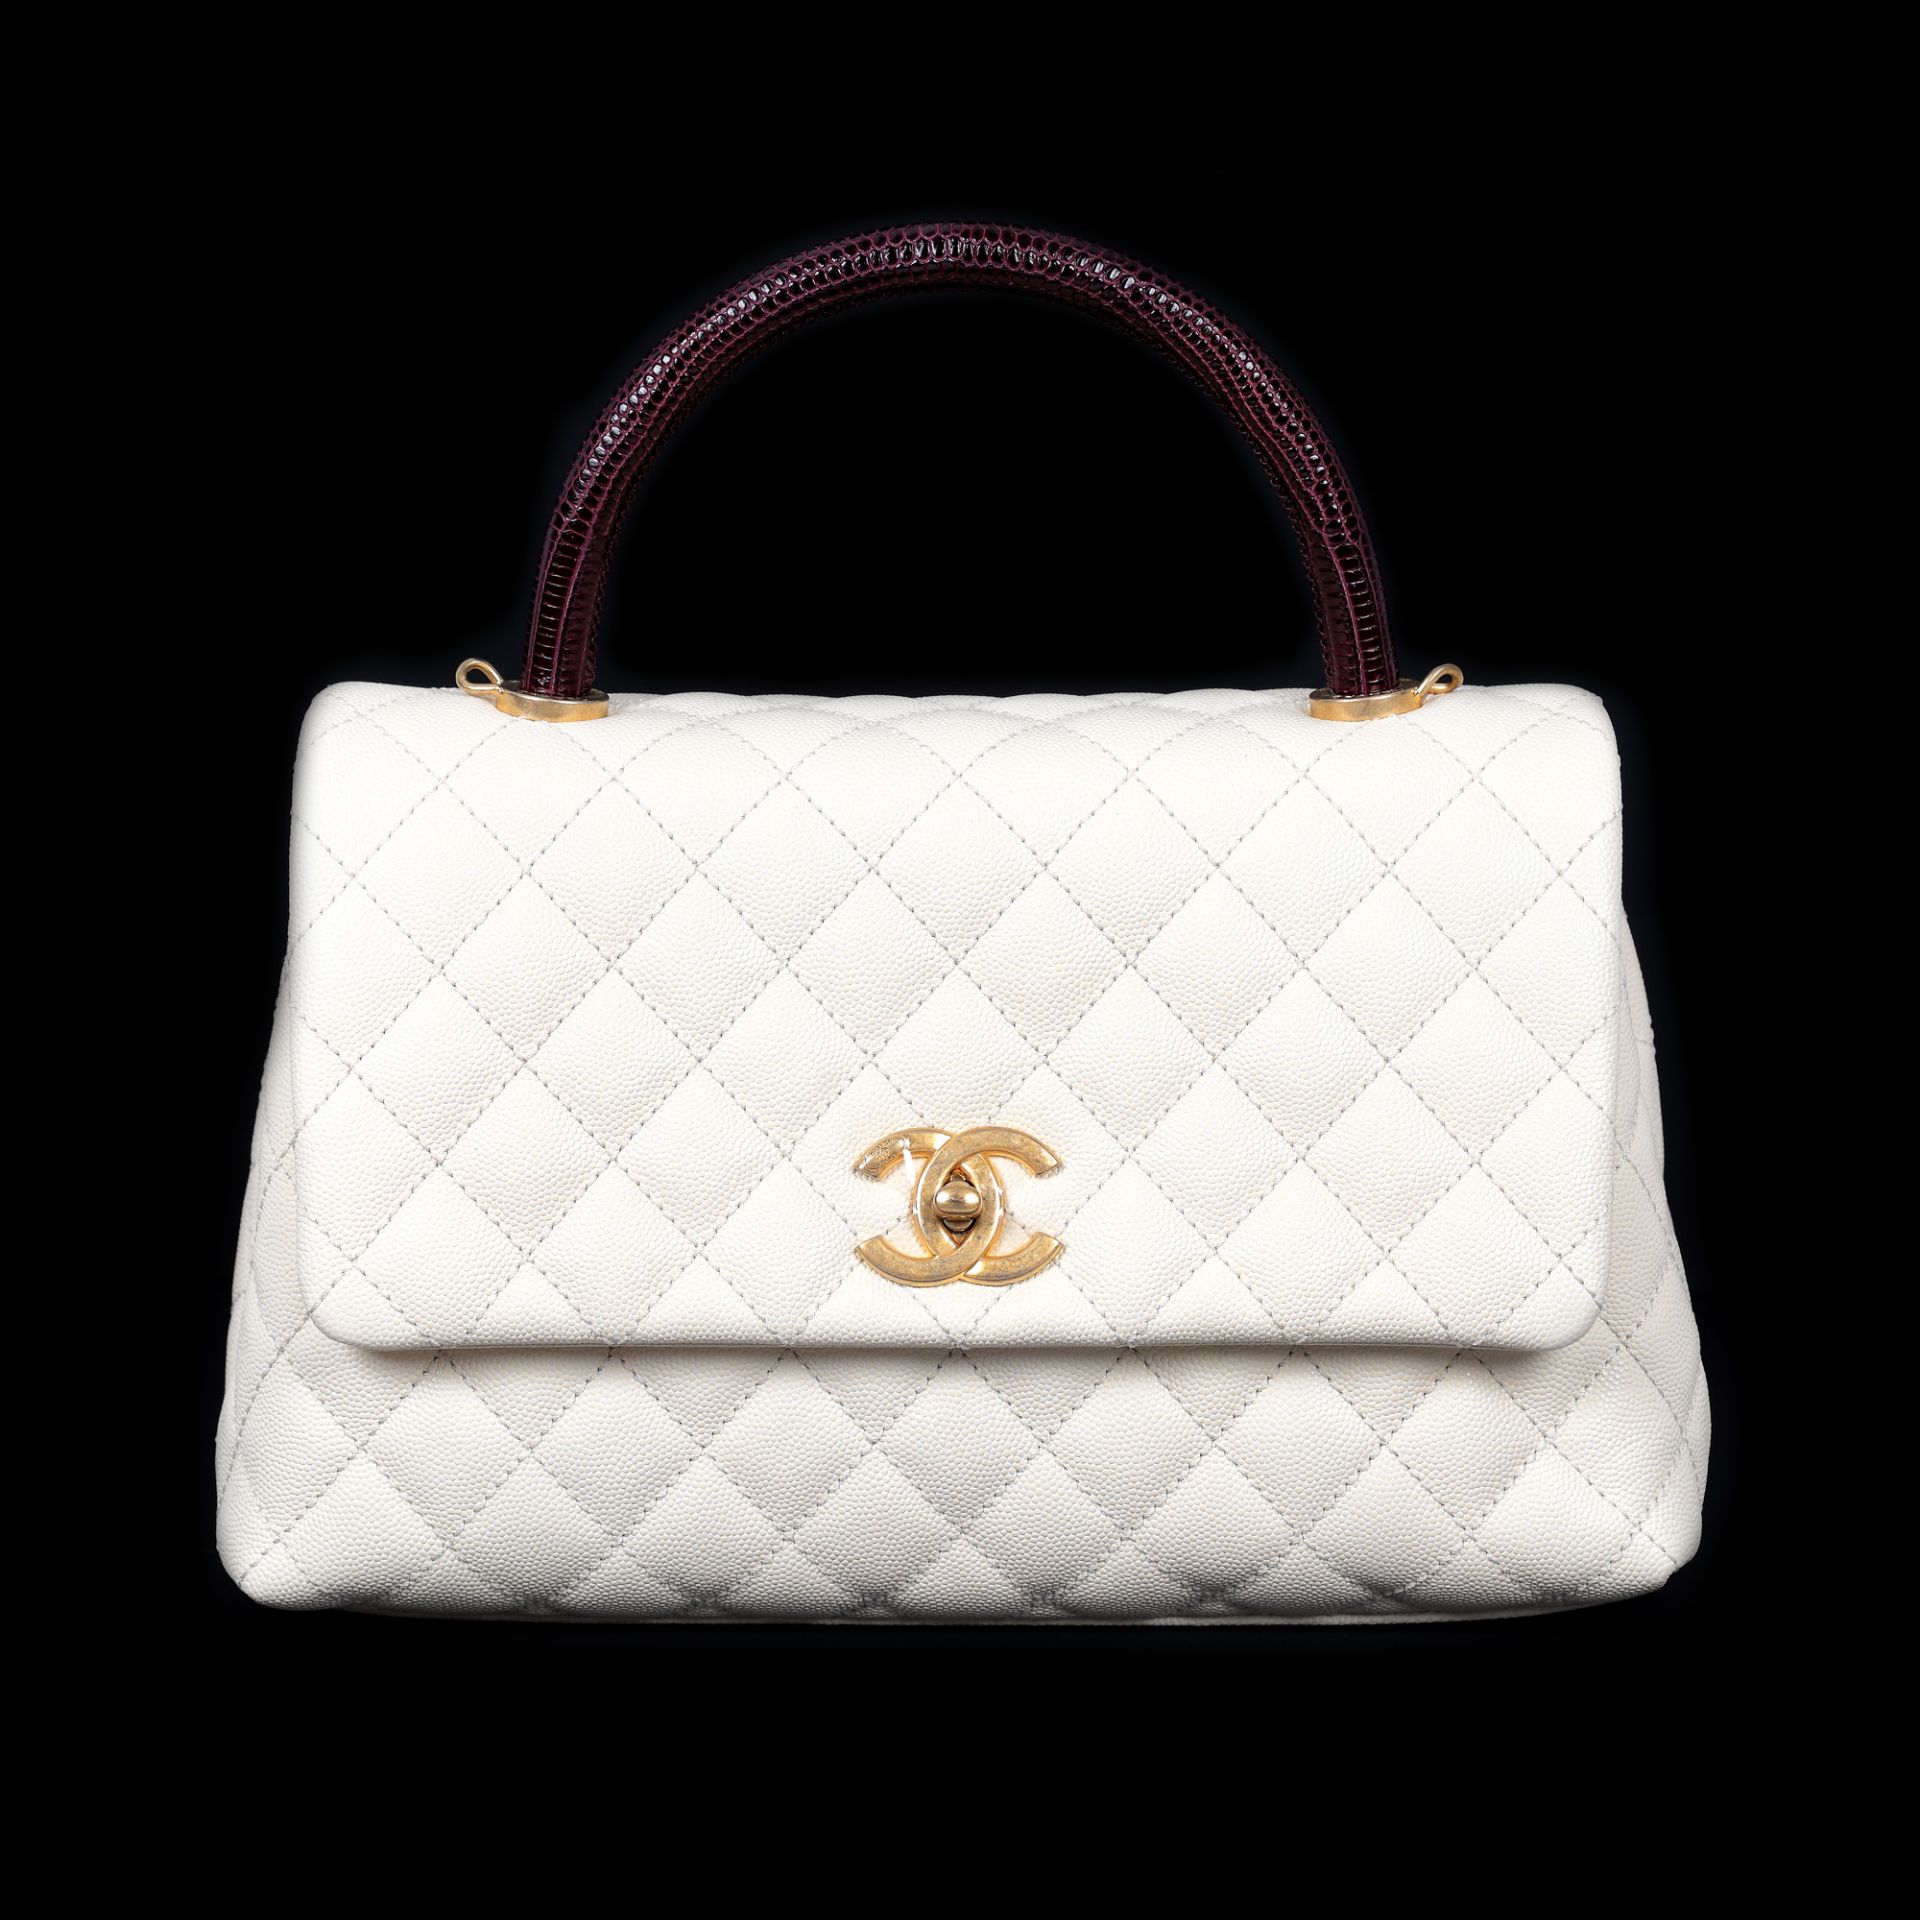 "Coco Handle Bag" - Chanel bag, quilted leather, white, lizard leather handle, burgundy